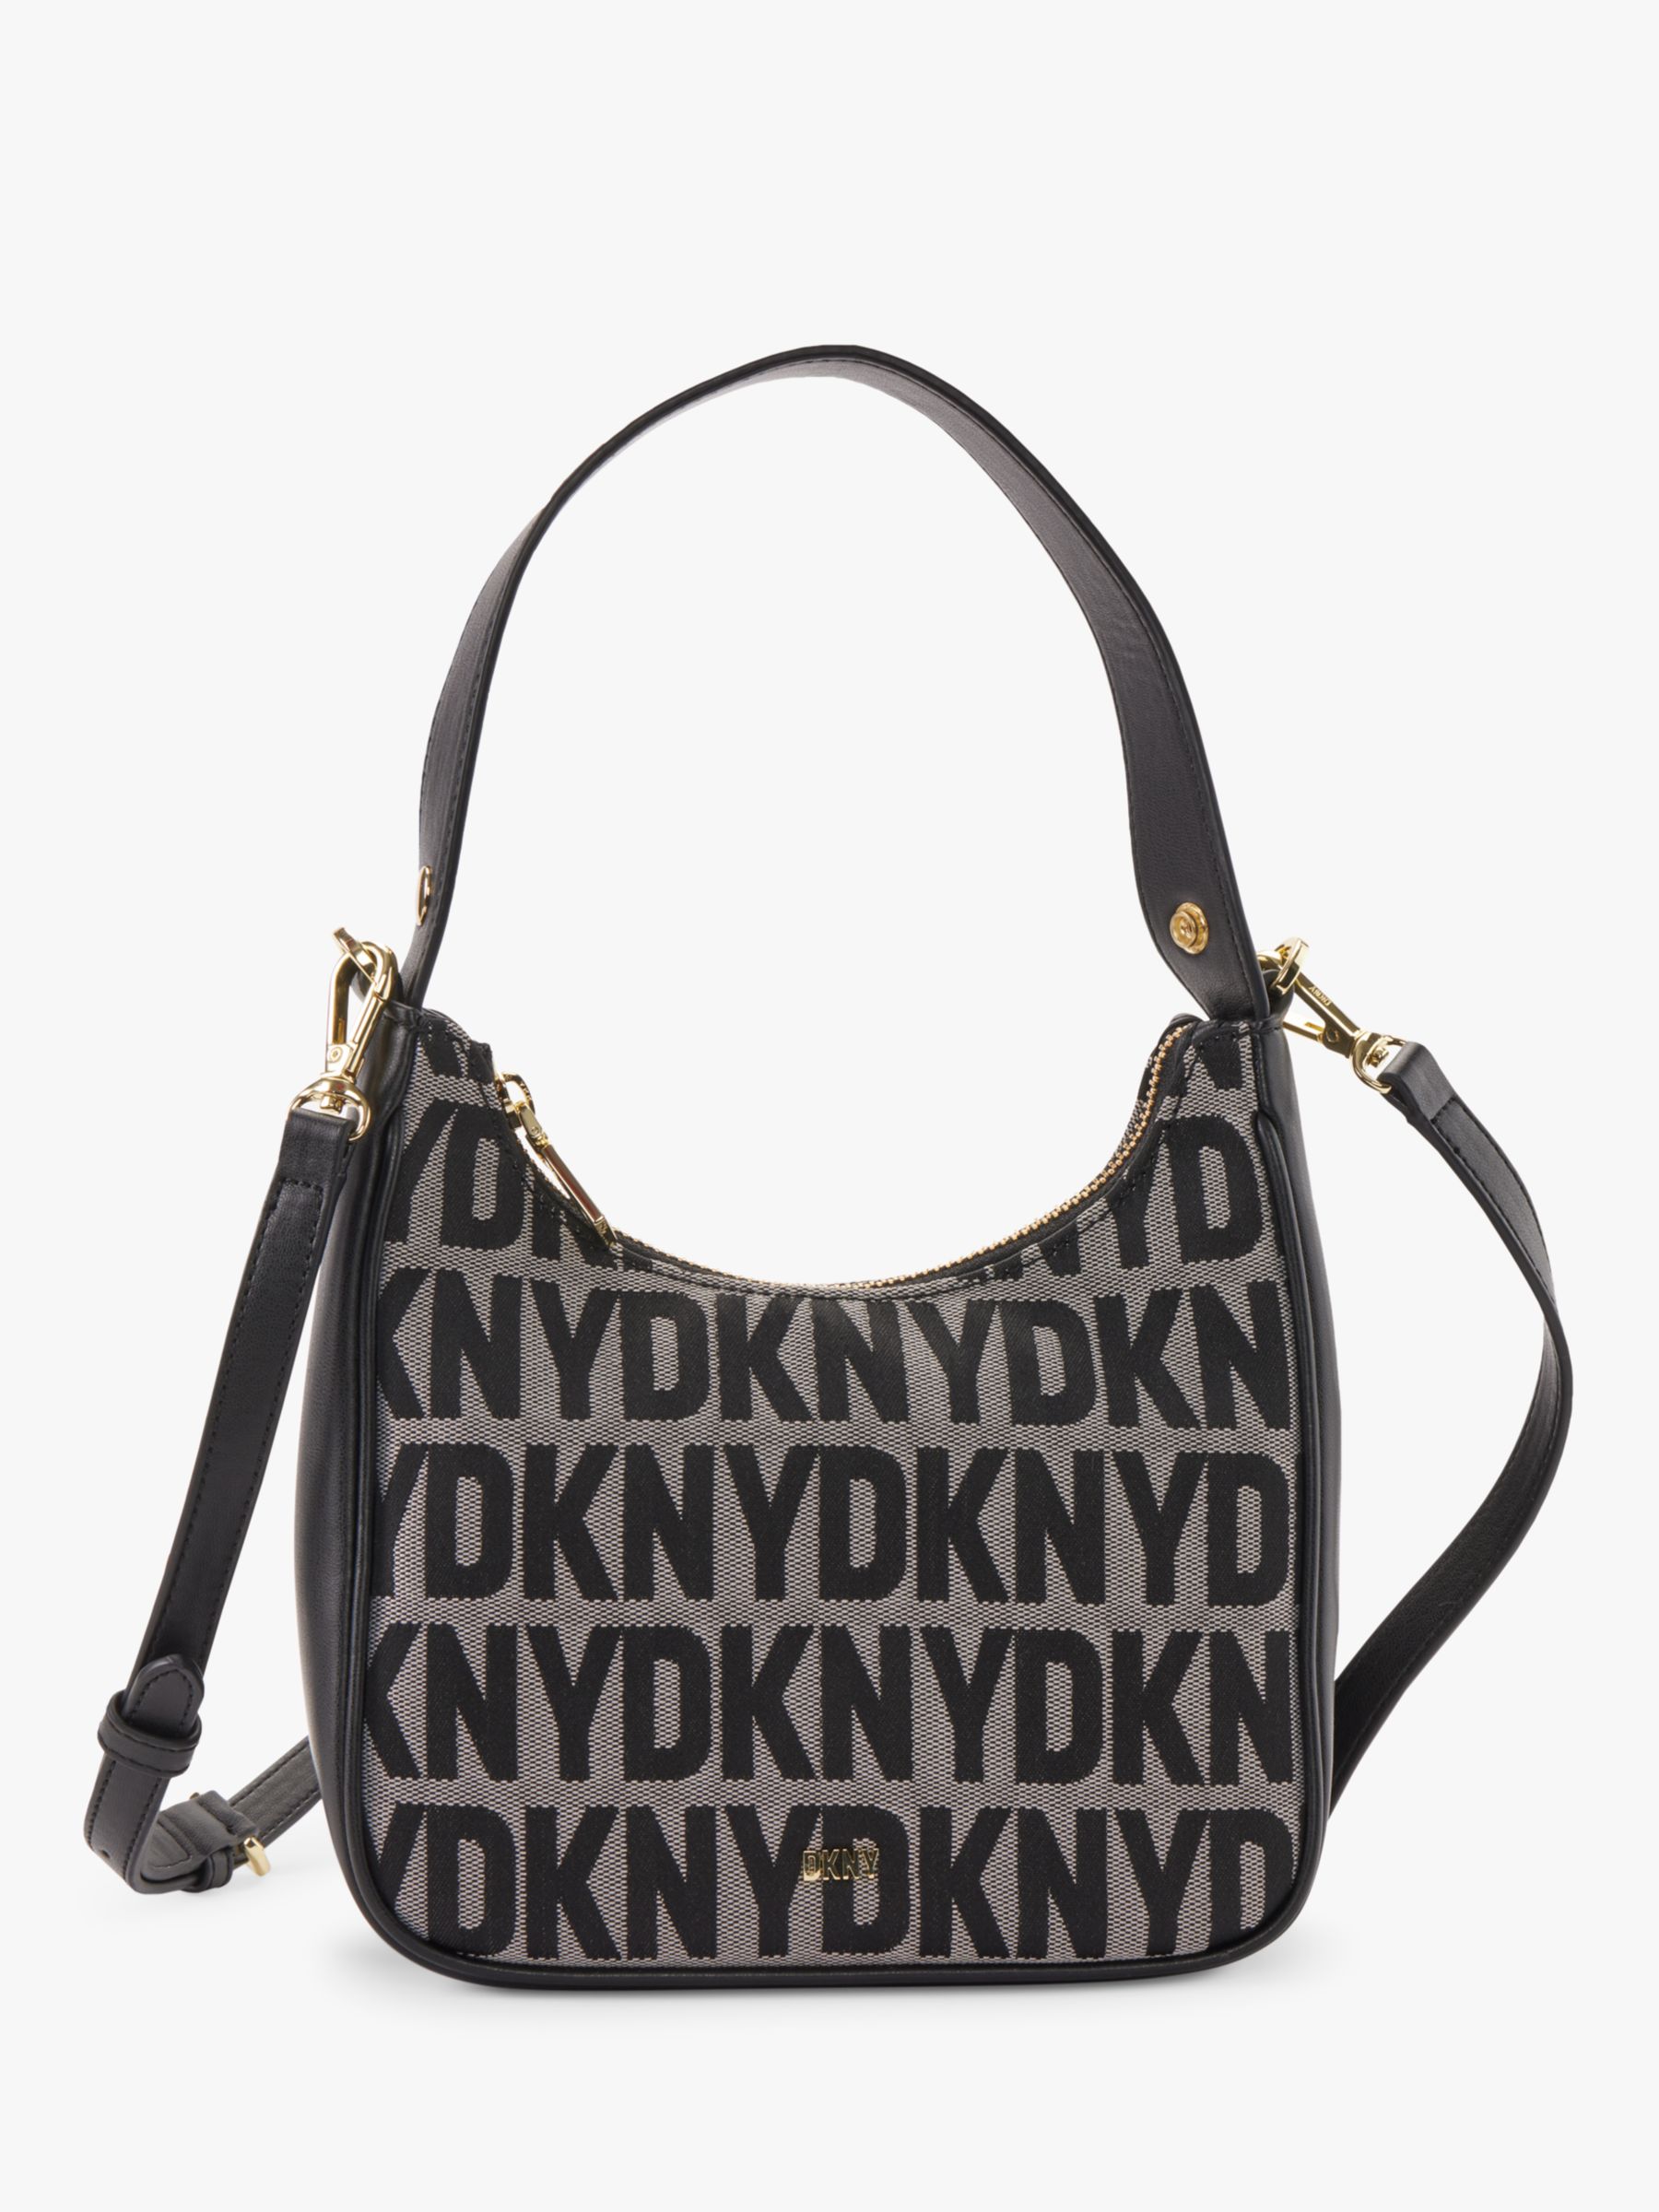 DKNY Handbags (80 products) compare prices today »